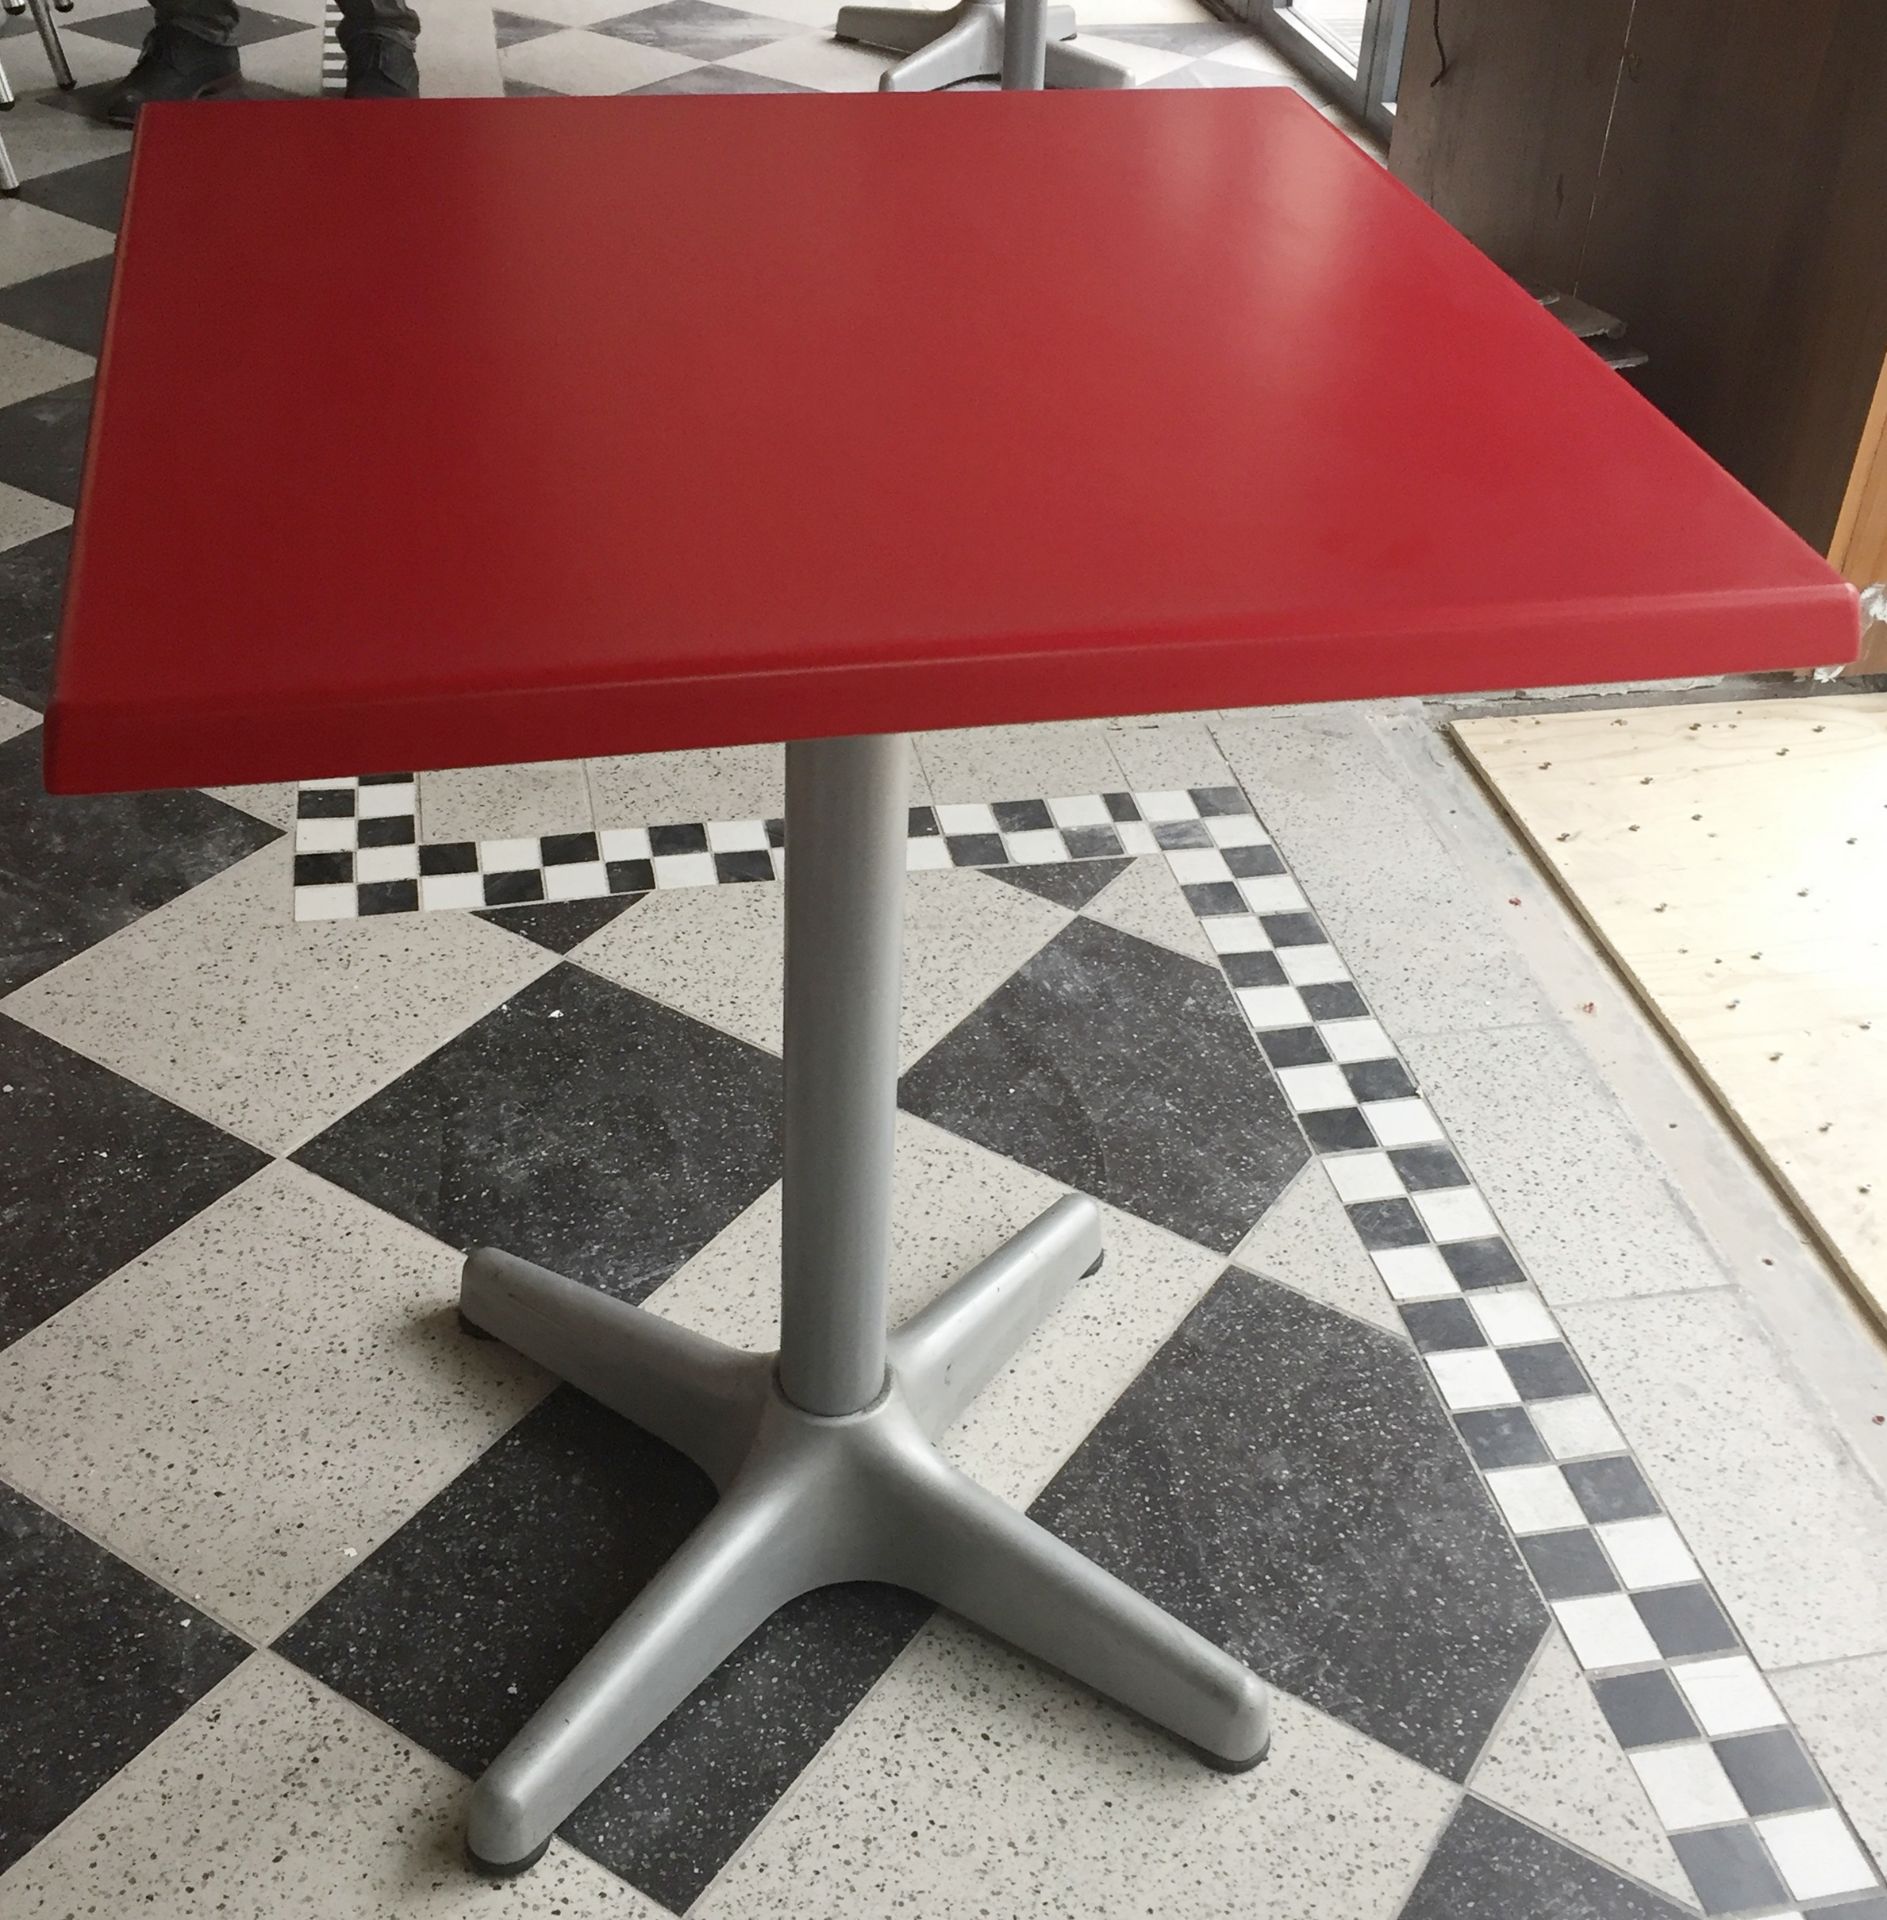 3 x Retro Square Bistro Tables - Red Tops With Silver Bases - CL235 - Location: London N1 These - Image 4 of 4